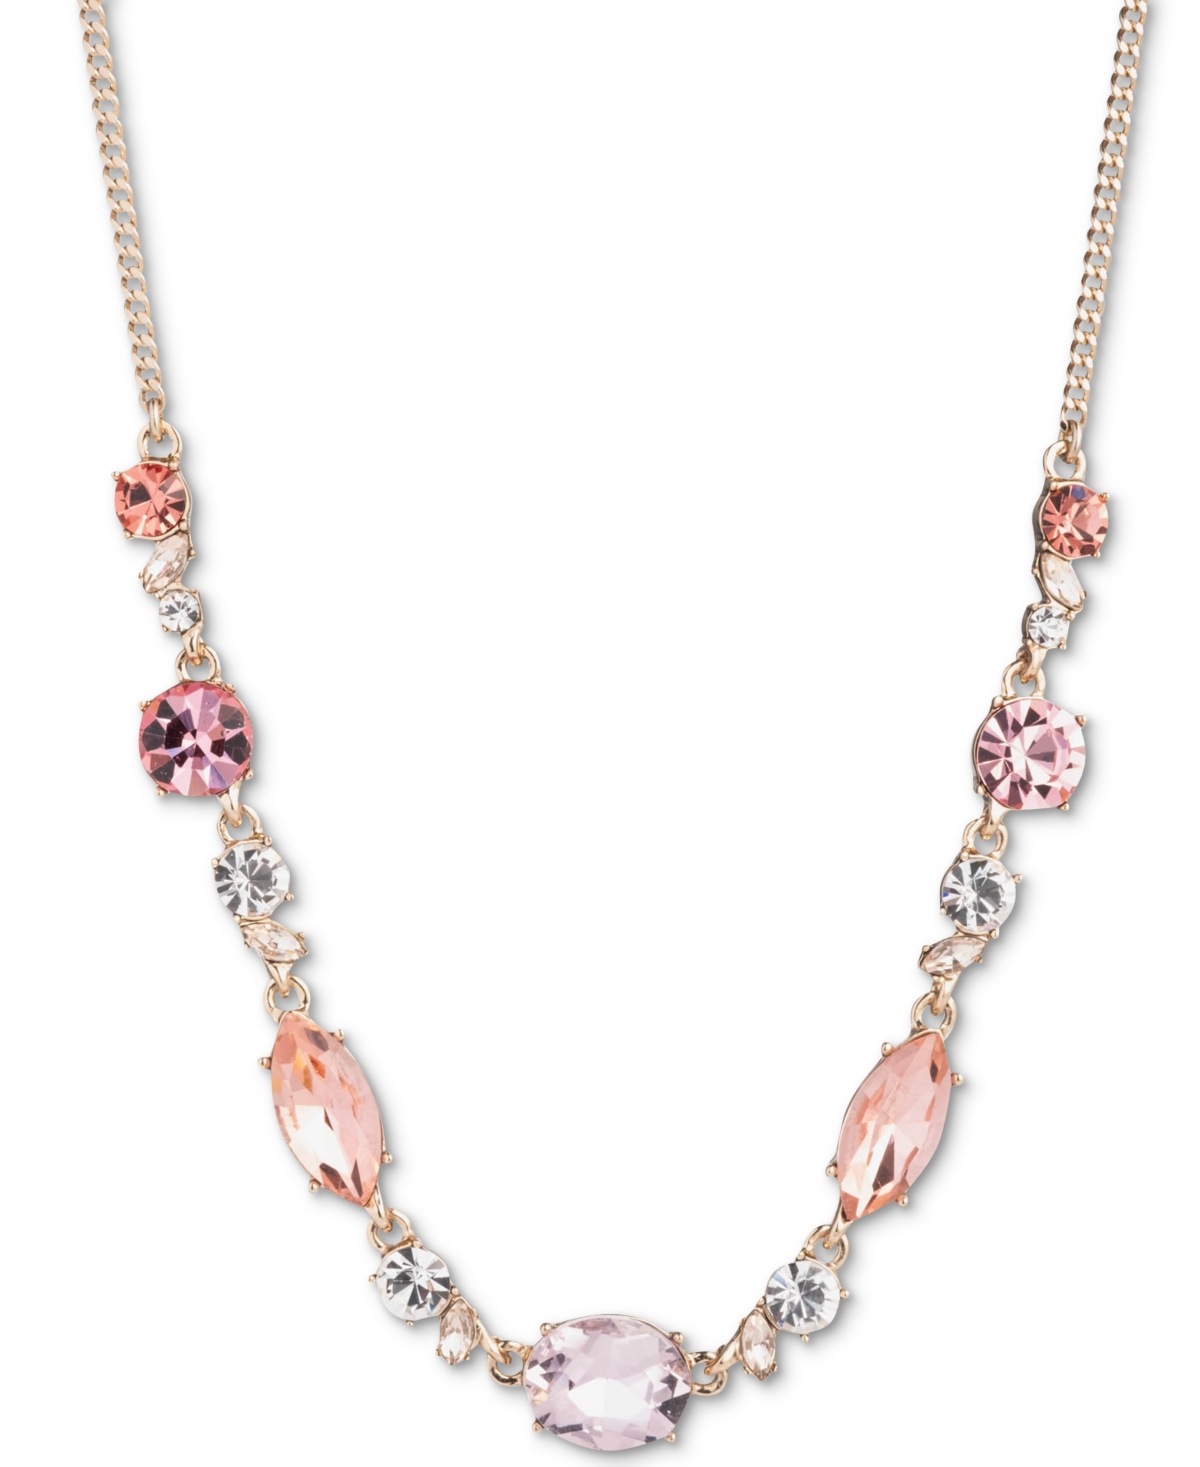 Givenchy Crystal Frontal Necklace, 16" + 3" Extender In Multi